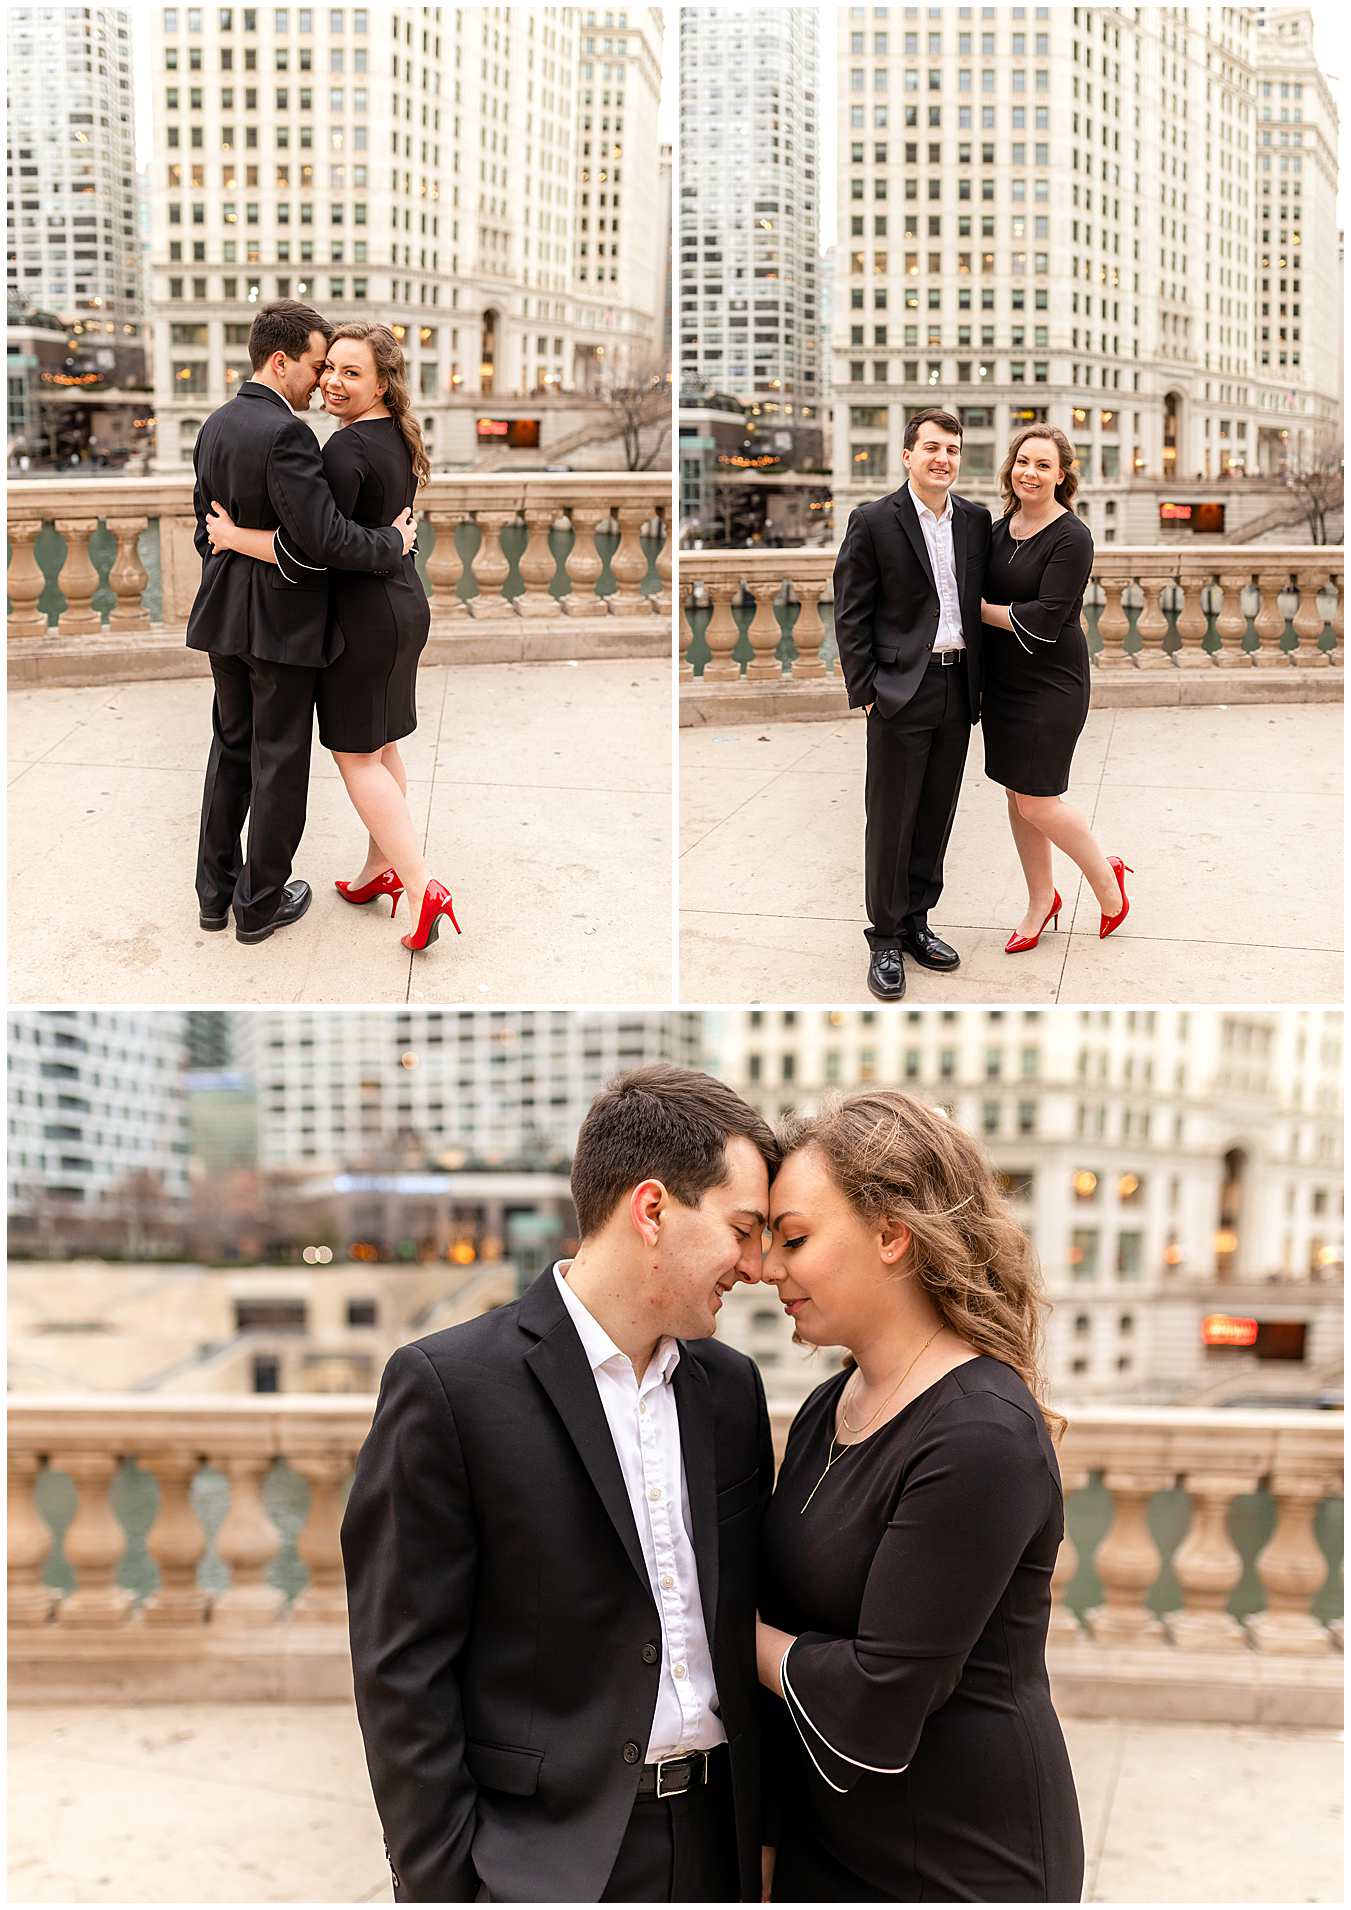 The Wrigley Building Engagement, Formal Downtown Engagement Photos